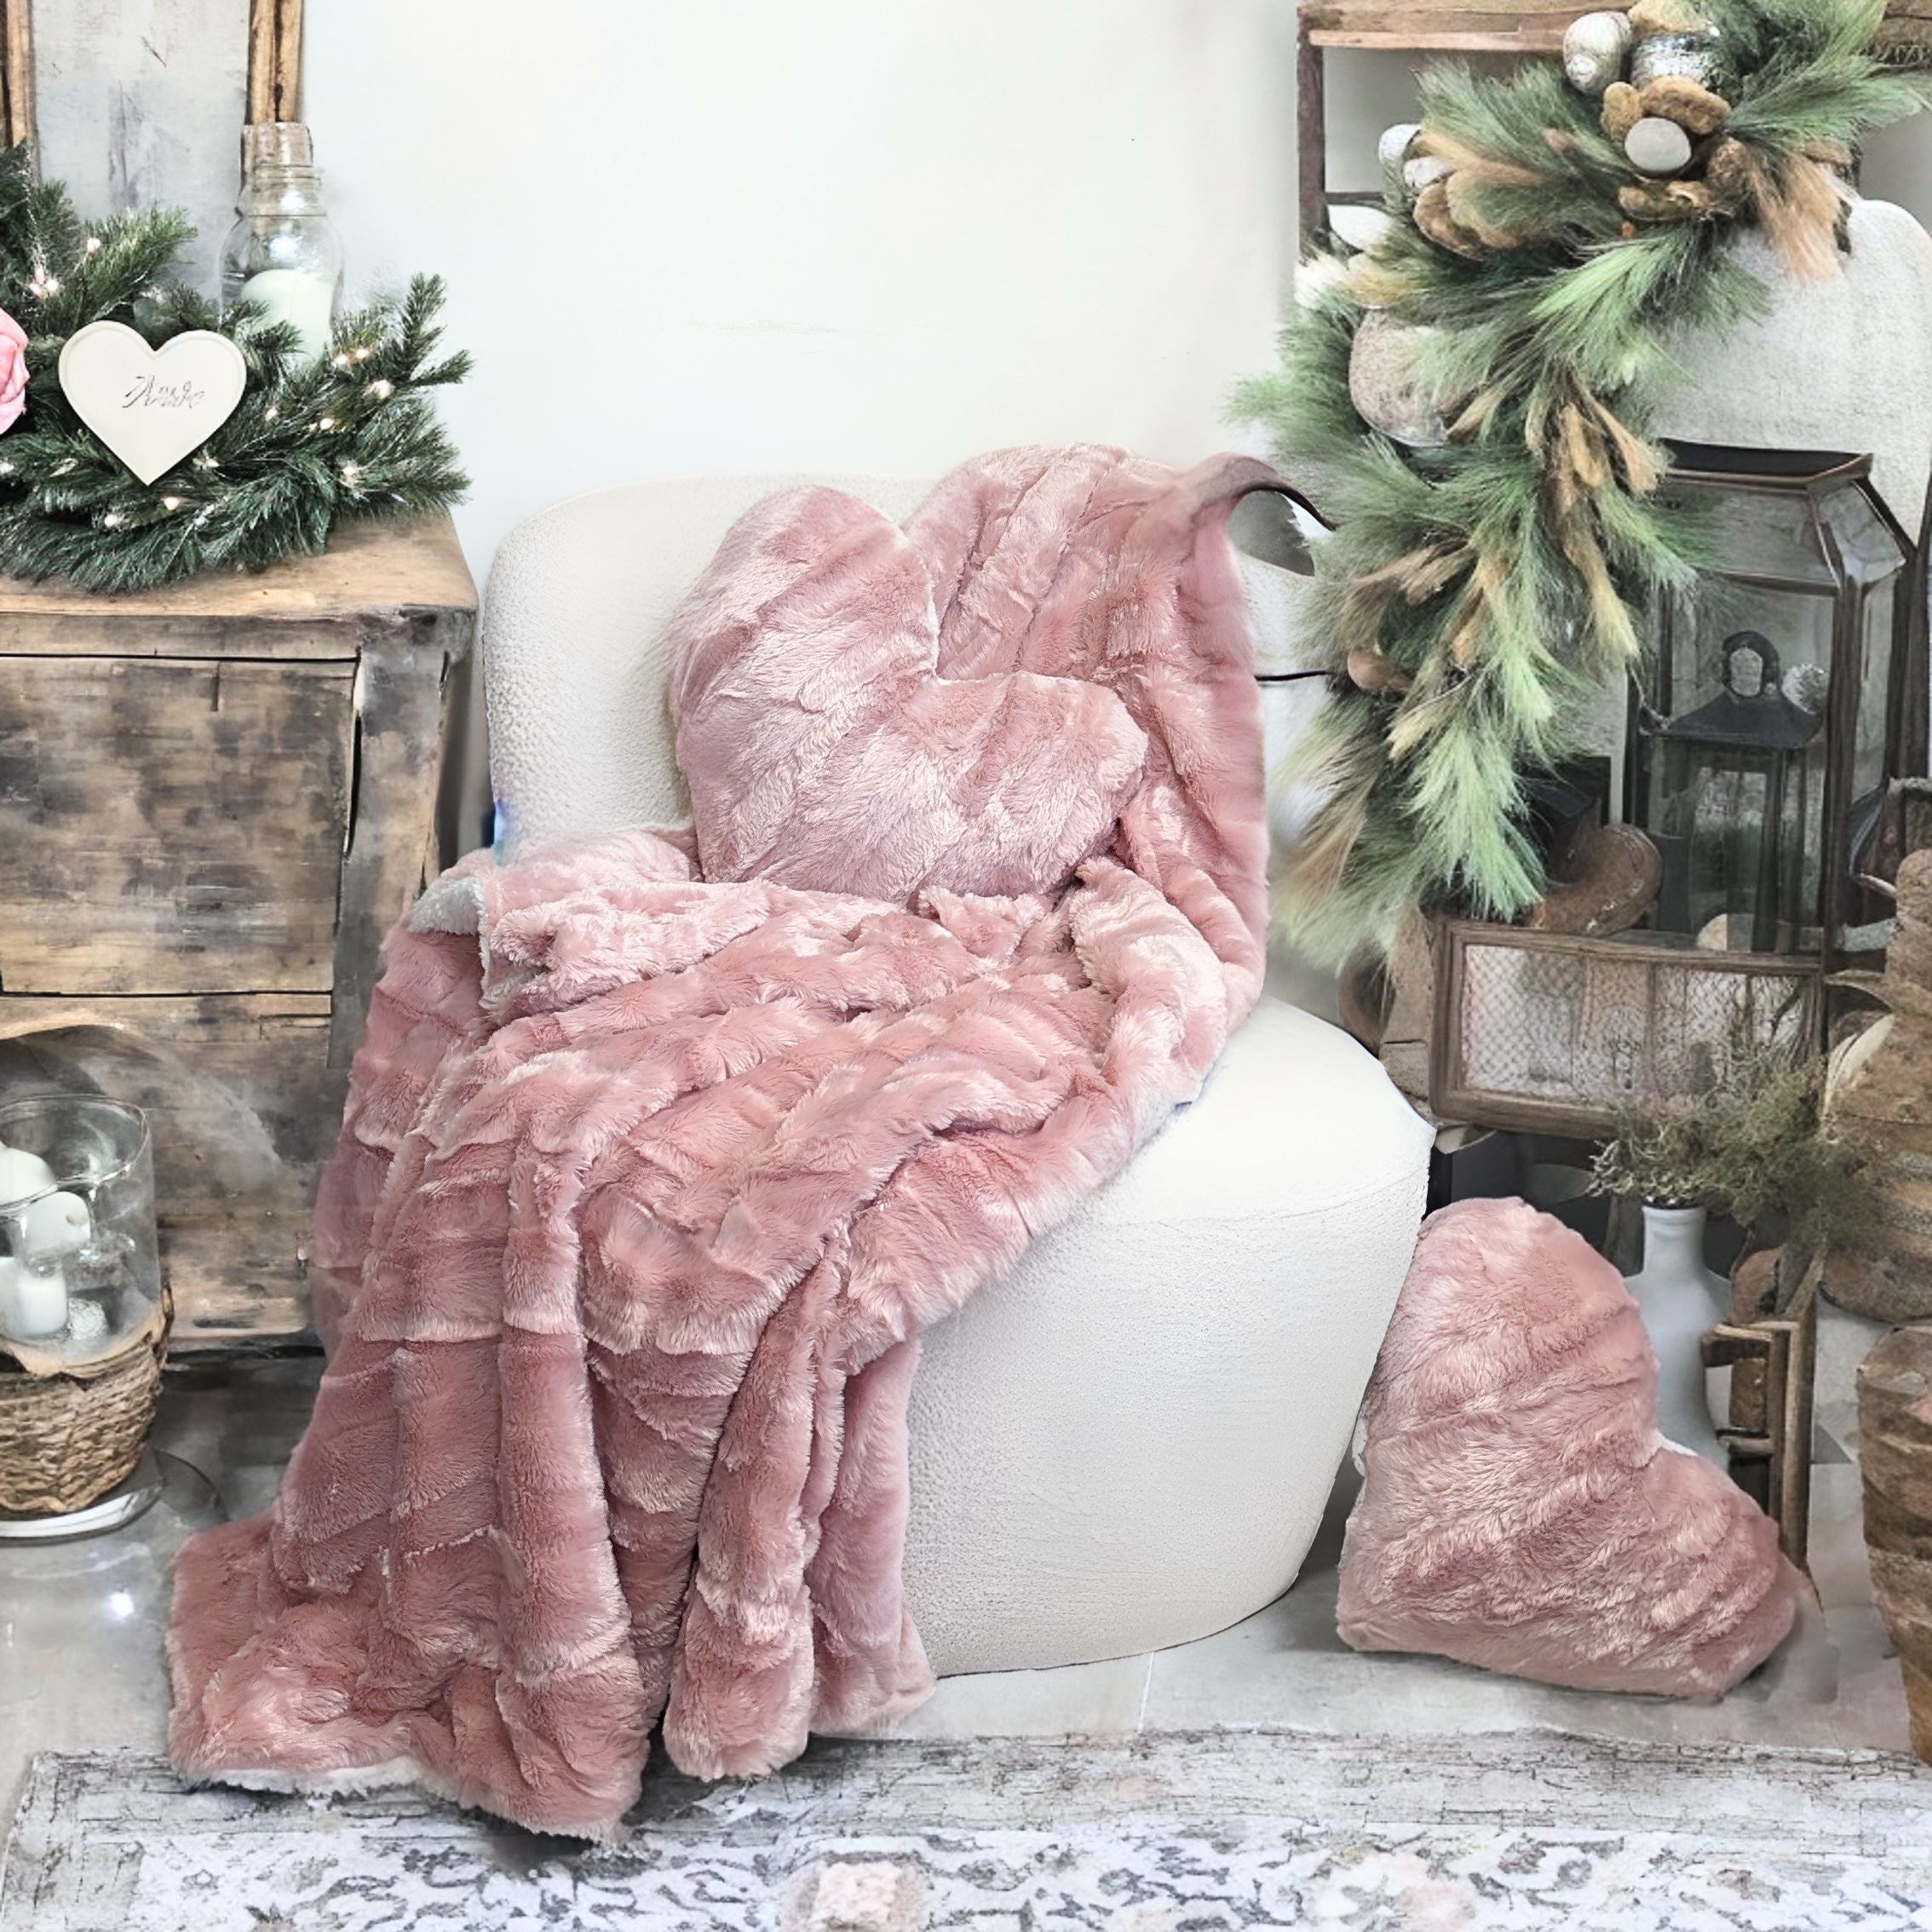 A cozy faux fur blush dusty rose pink plush blanket and a heart-shaped pillow rest on a white armchair